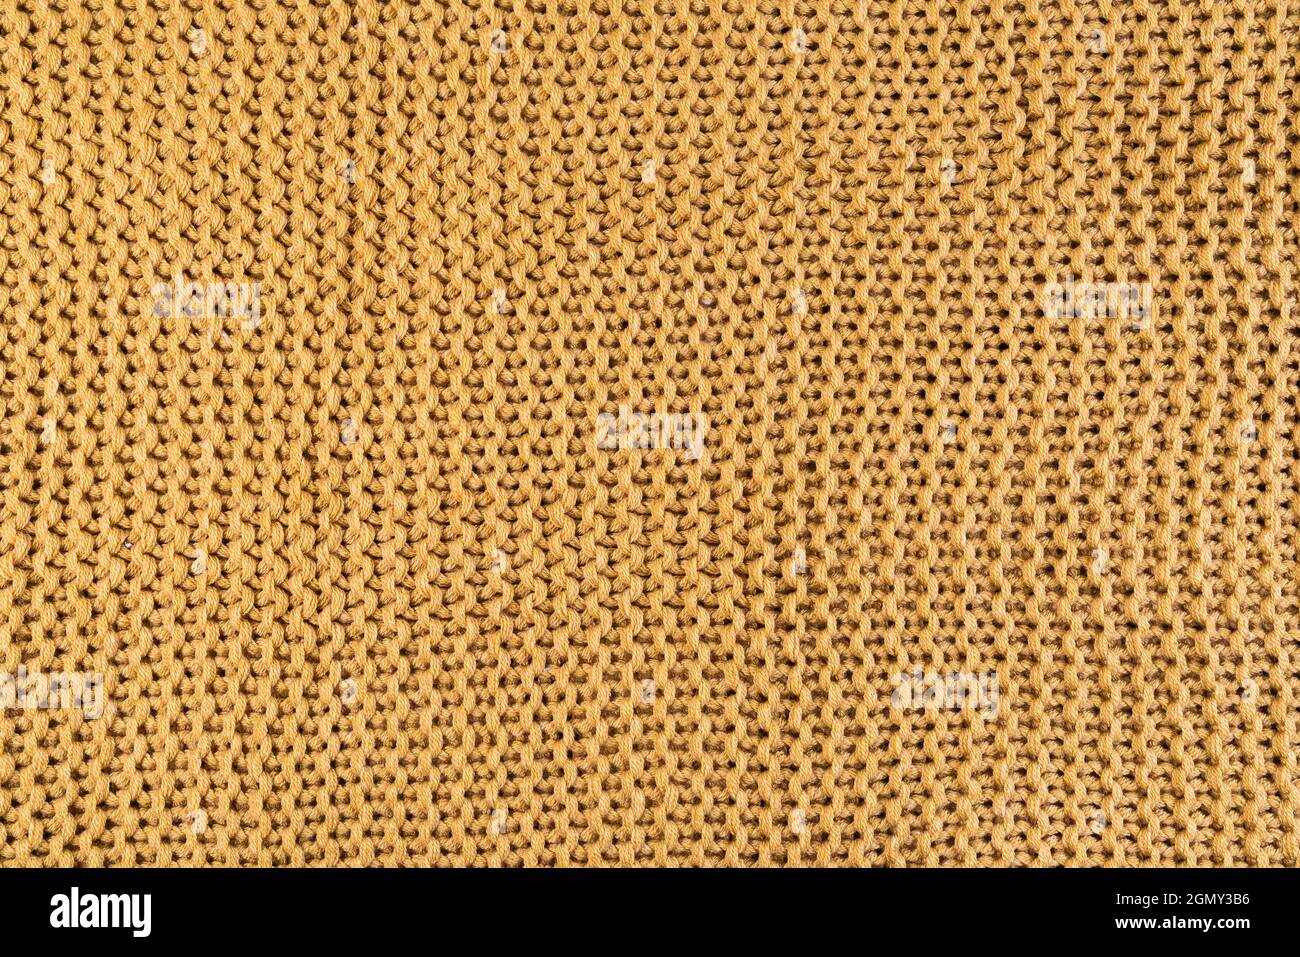 close-up of gold colored knitted fabric, textile background Stock Photo